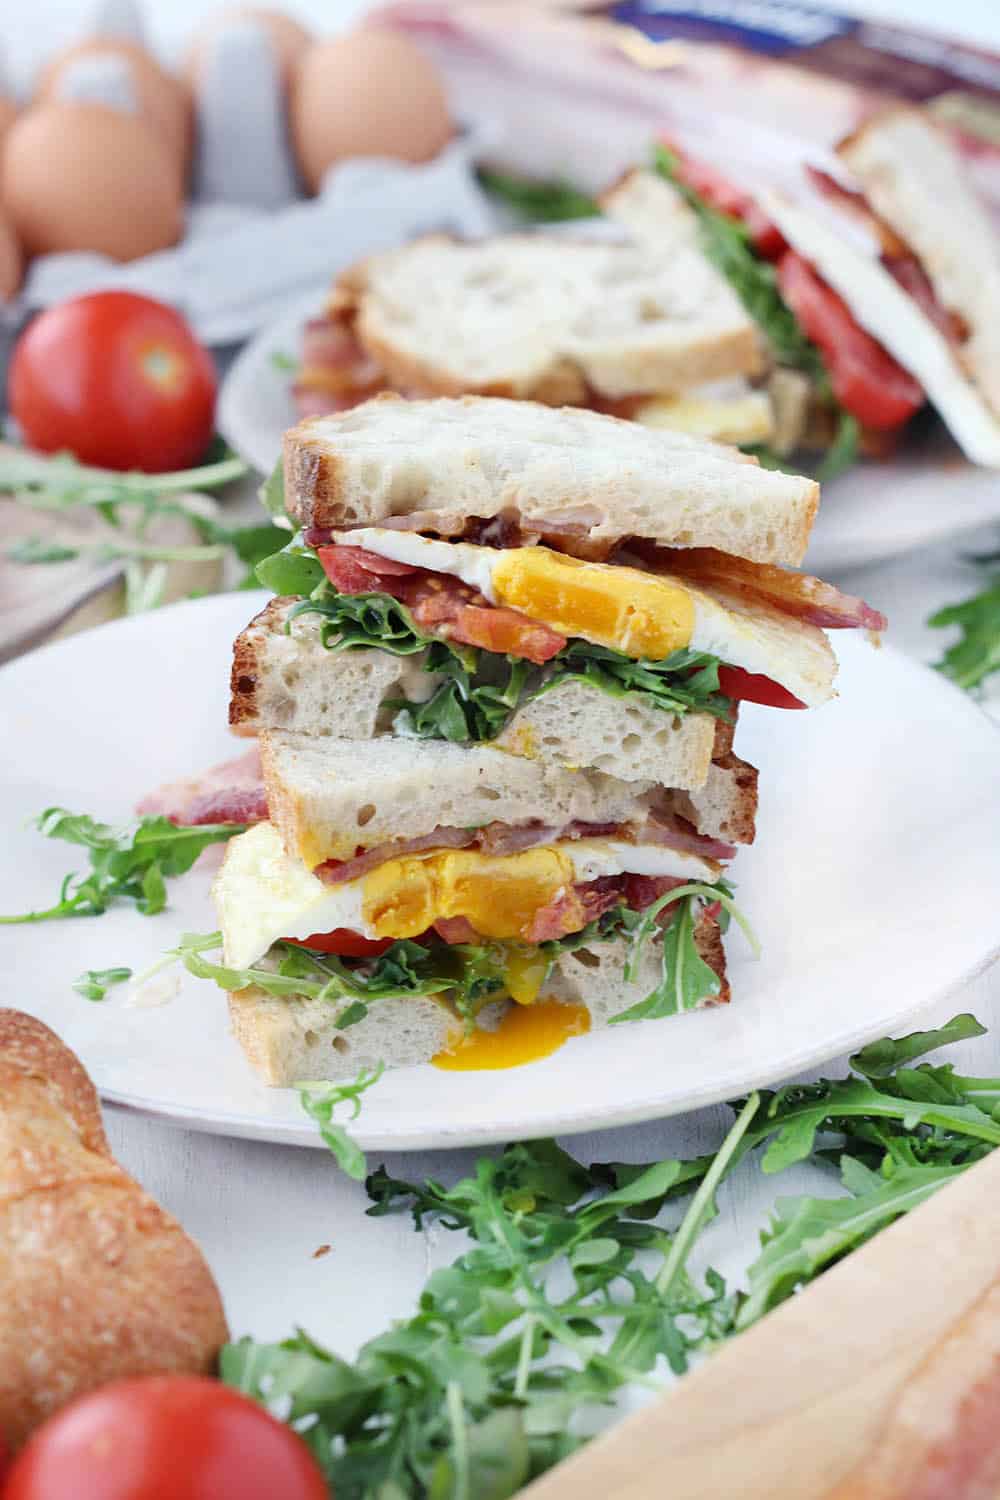 These Breakfast BLTs with Spicy Mayo and Arugula are piled high with thick-cut bacon and a perfectly fried egg! Bake the bacon in the oven to easily make these for a crowd.